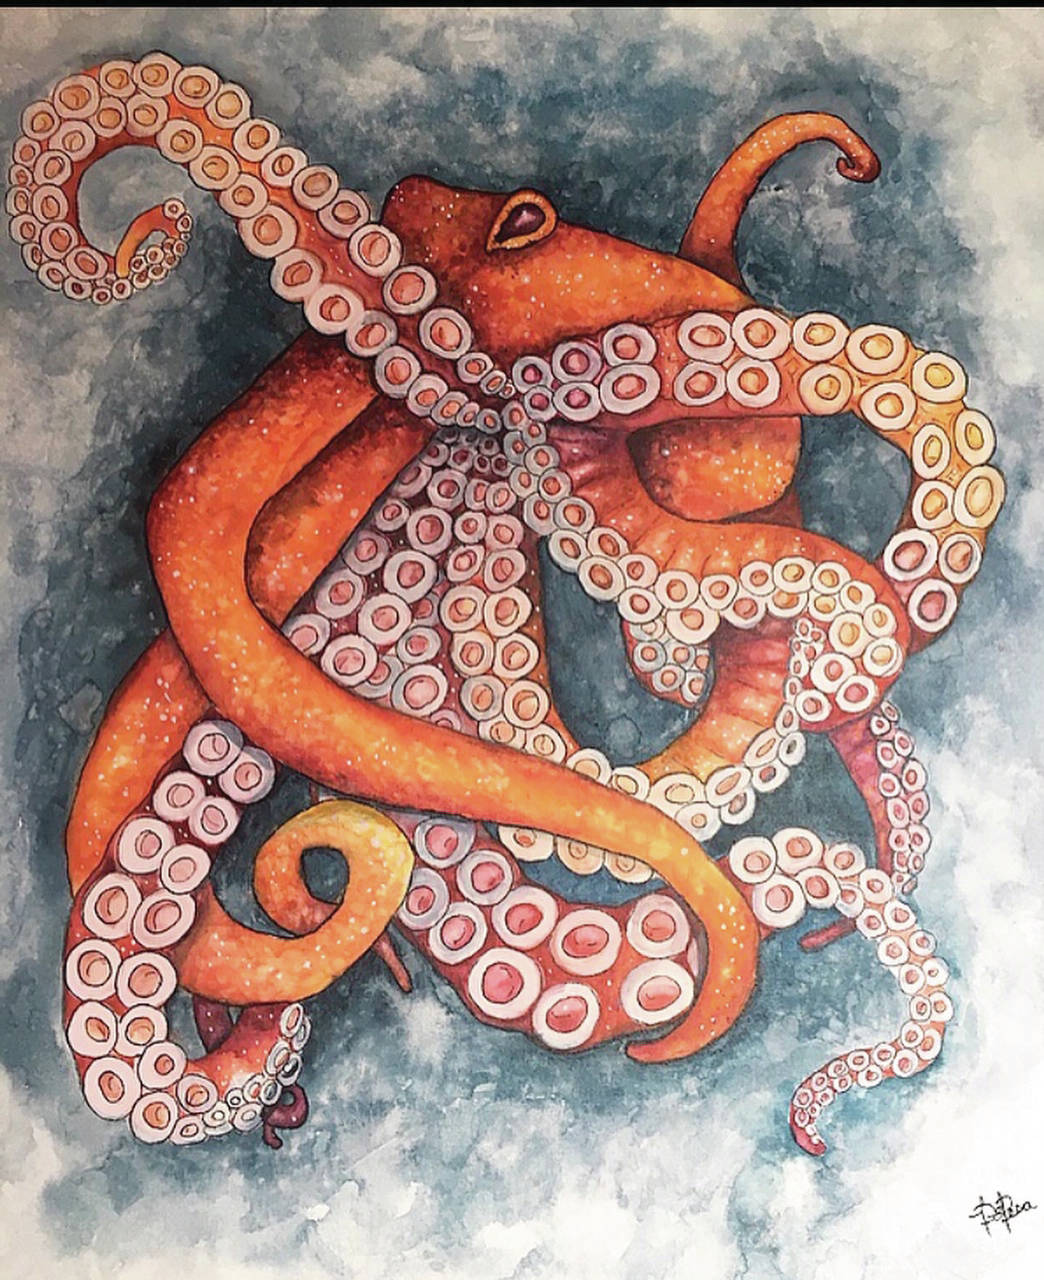 Jen DePesa’s octopus painting is one of the works of art shown at Grace Ridge Brewery for its October 2020 show benefiting South Peninsula Haven House in Homer, Alaska. (Photo courtesy of South Peninsula Haven House)